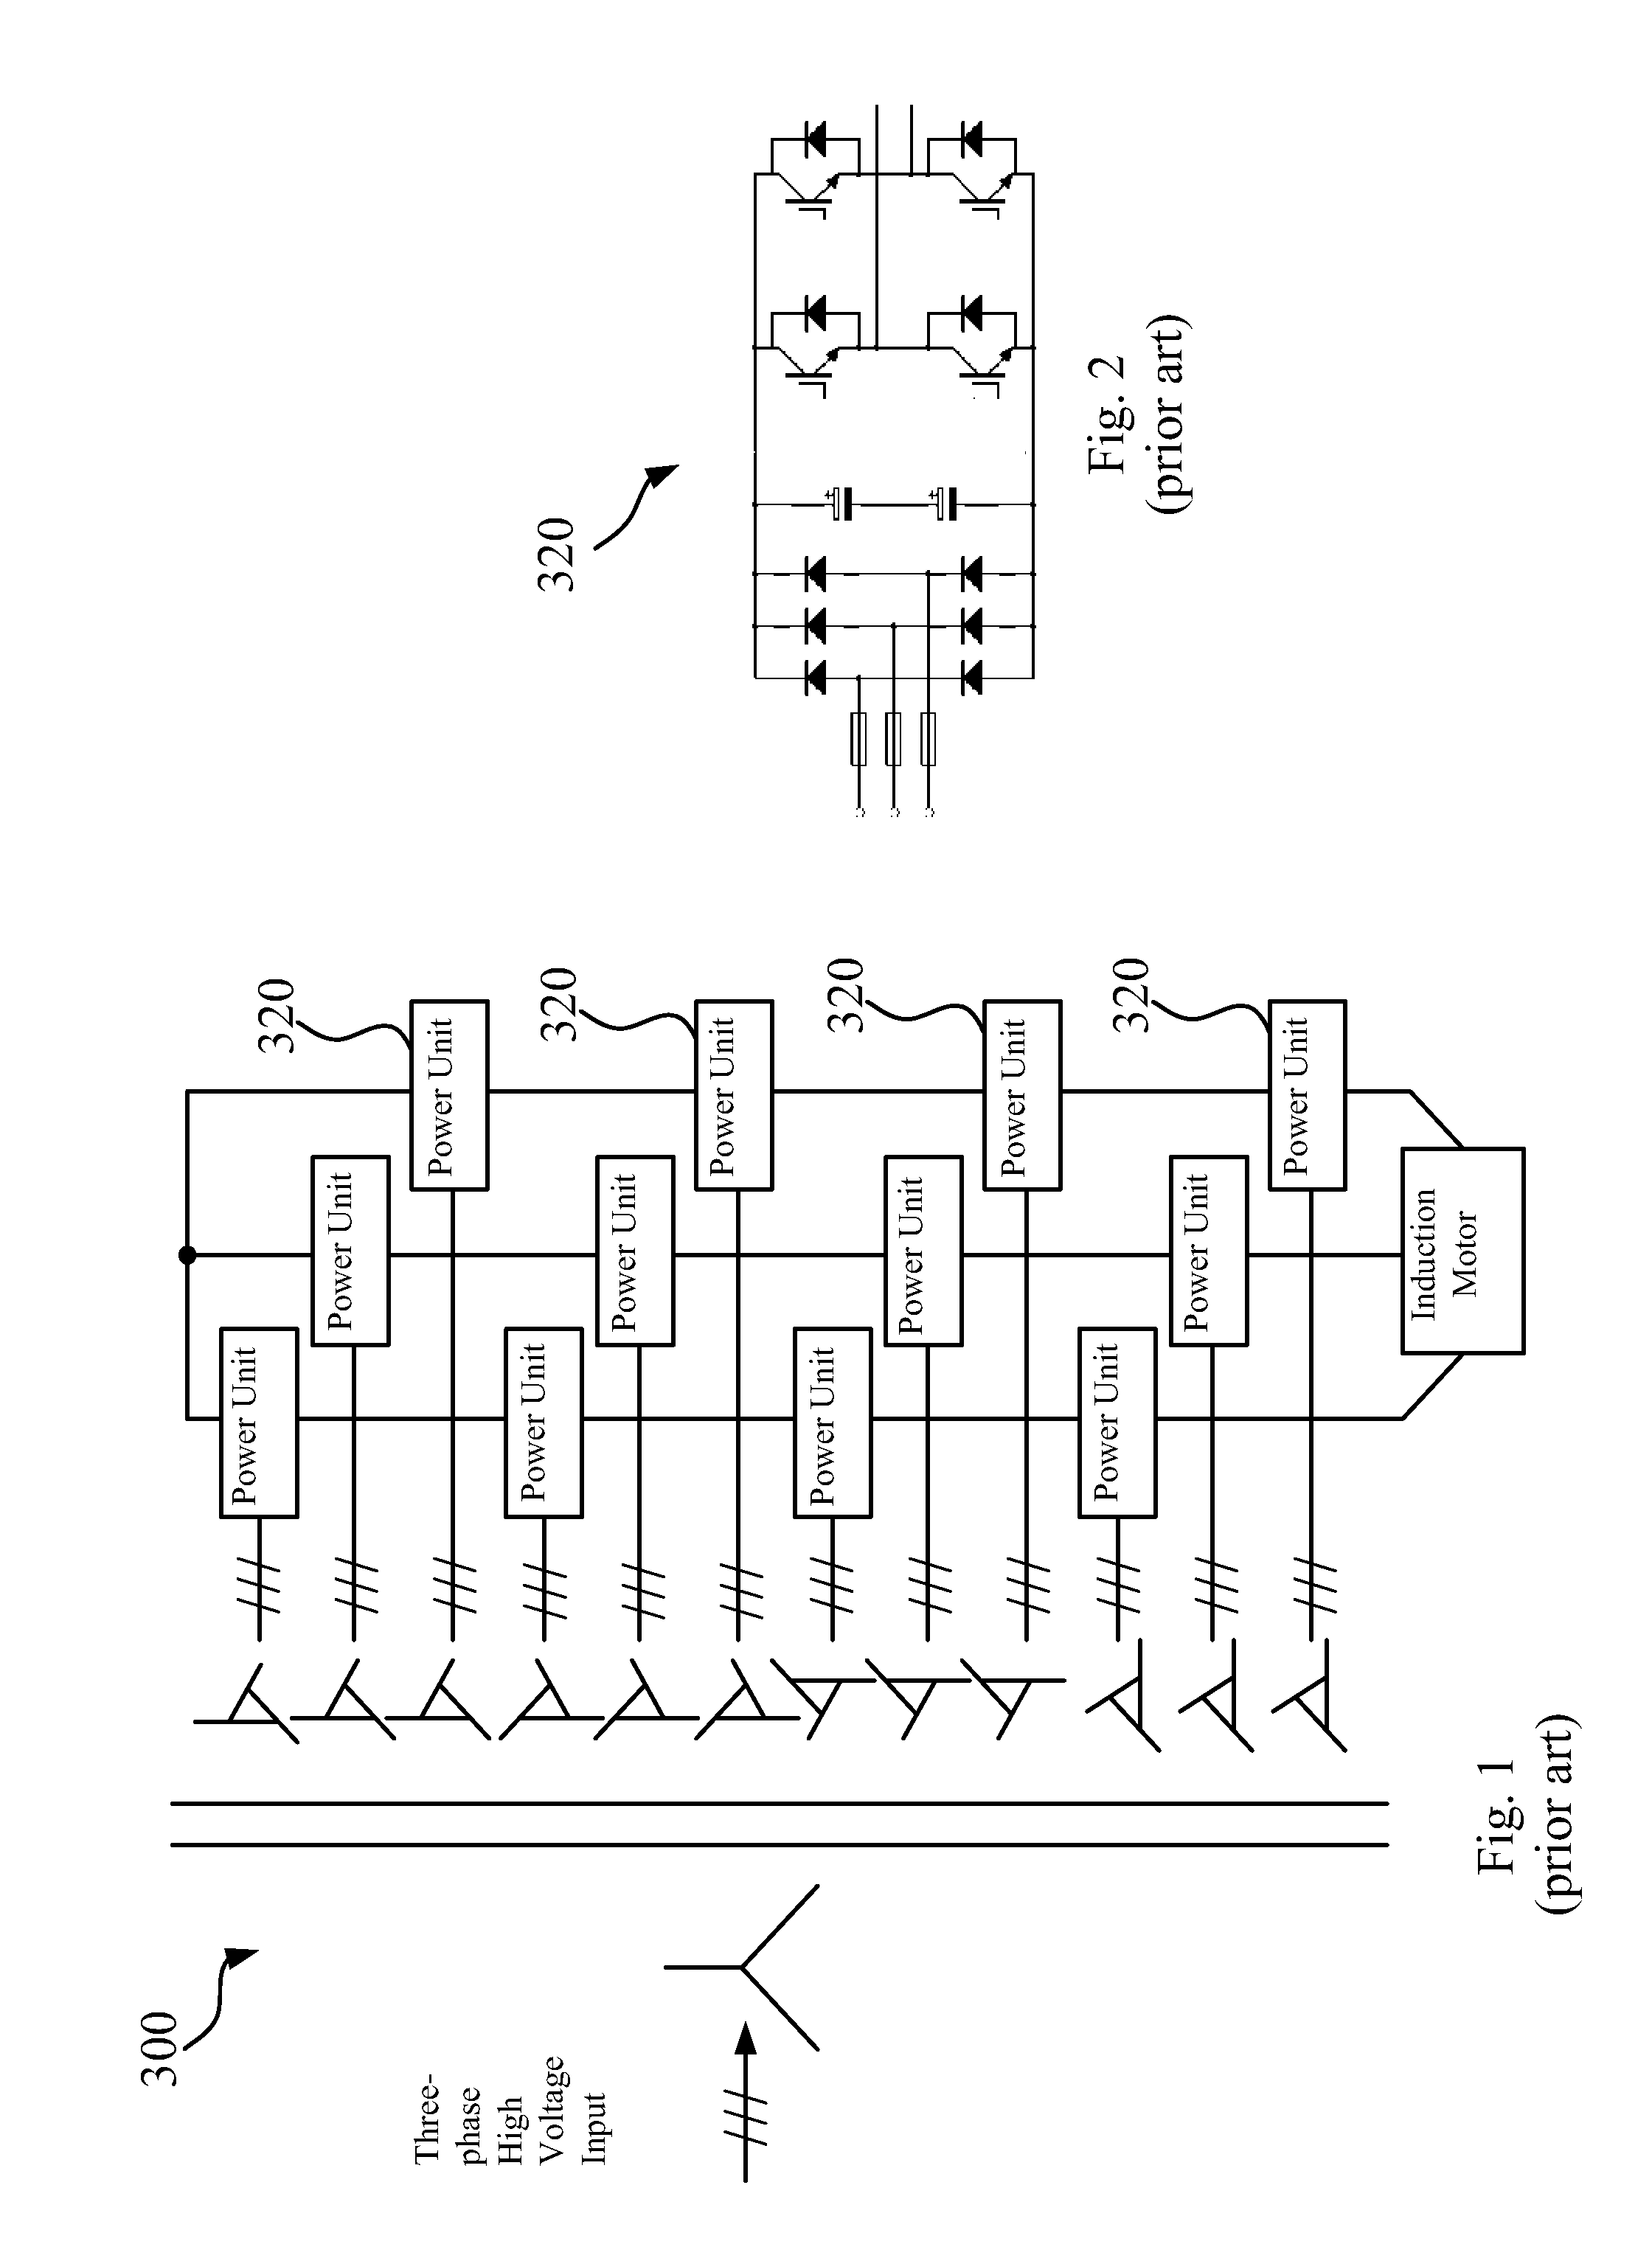 Medium voltage variable frequency driving system